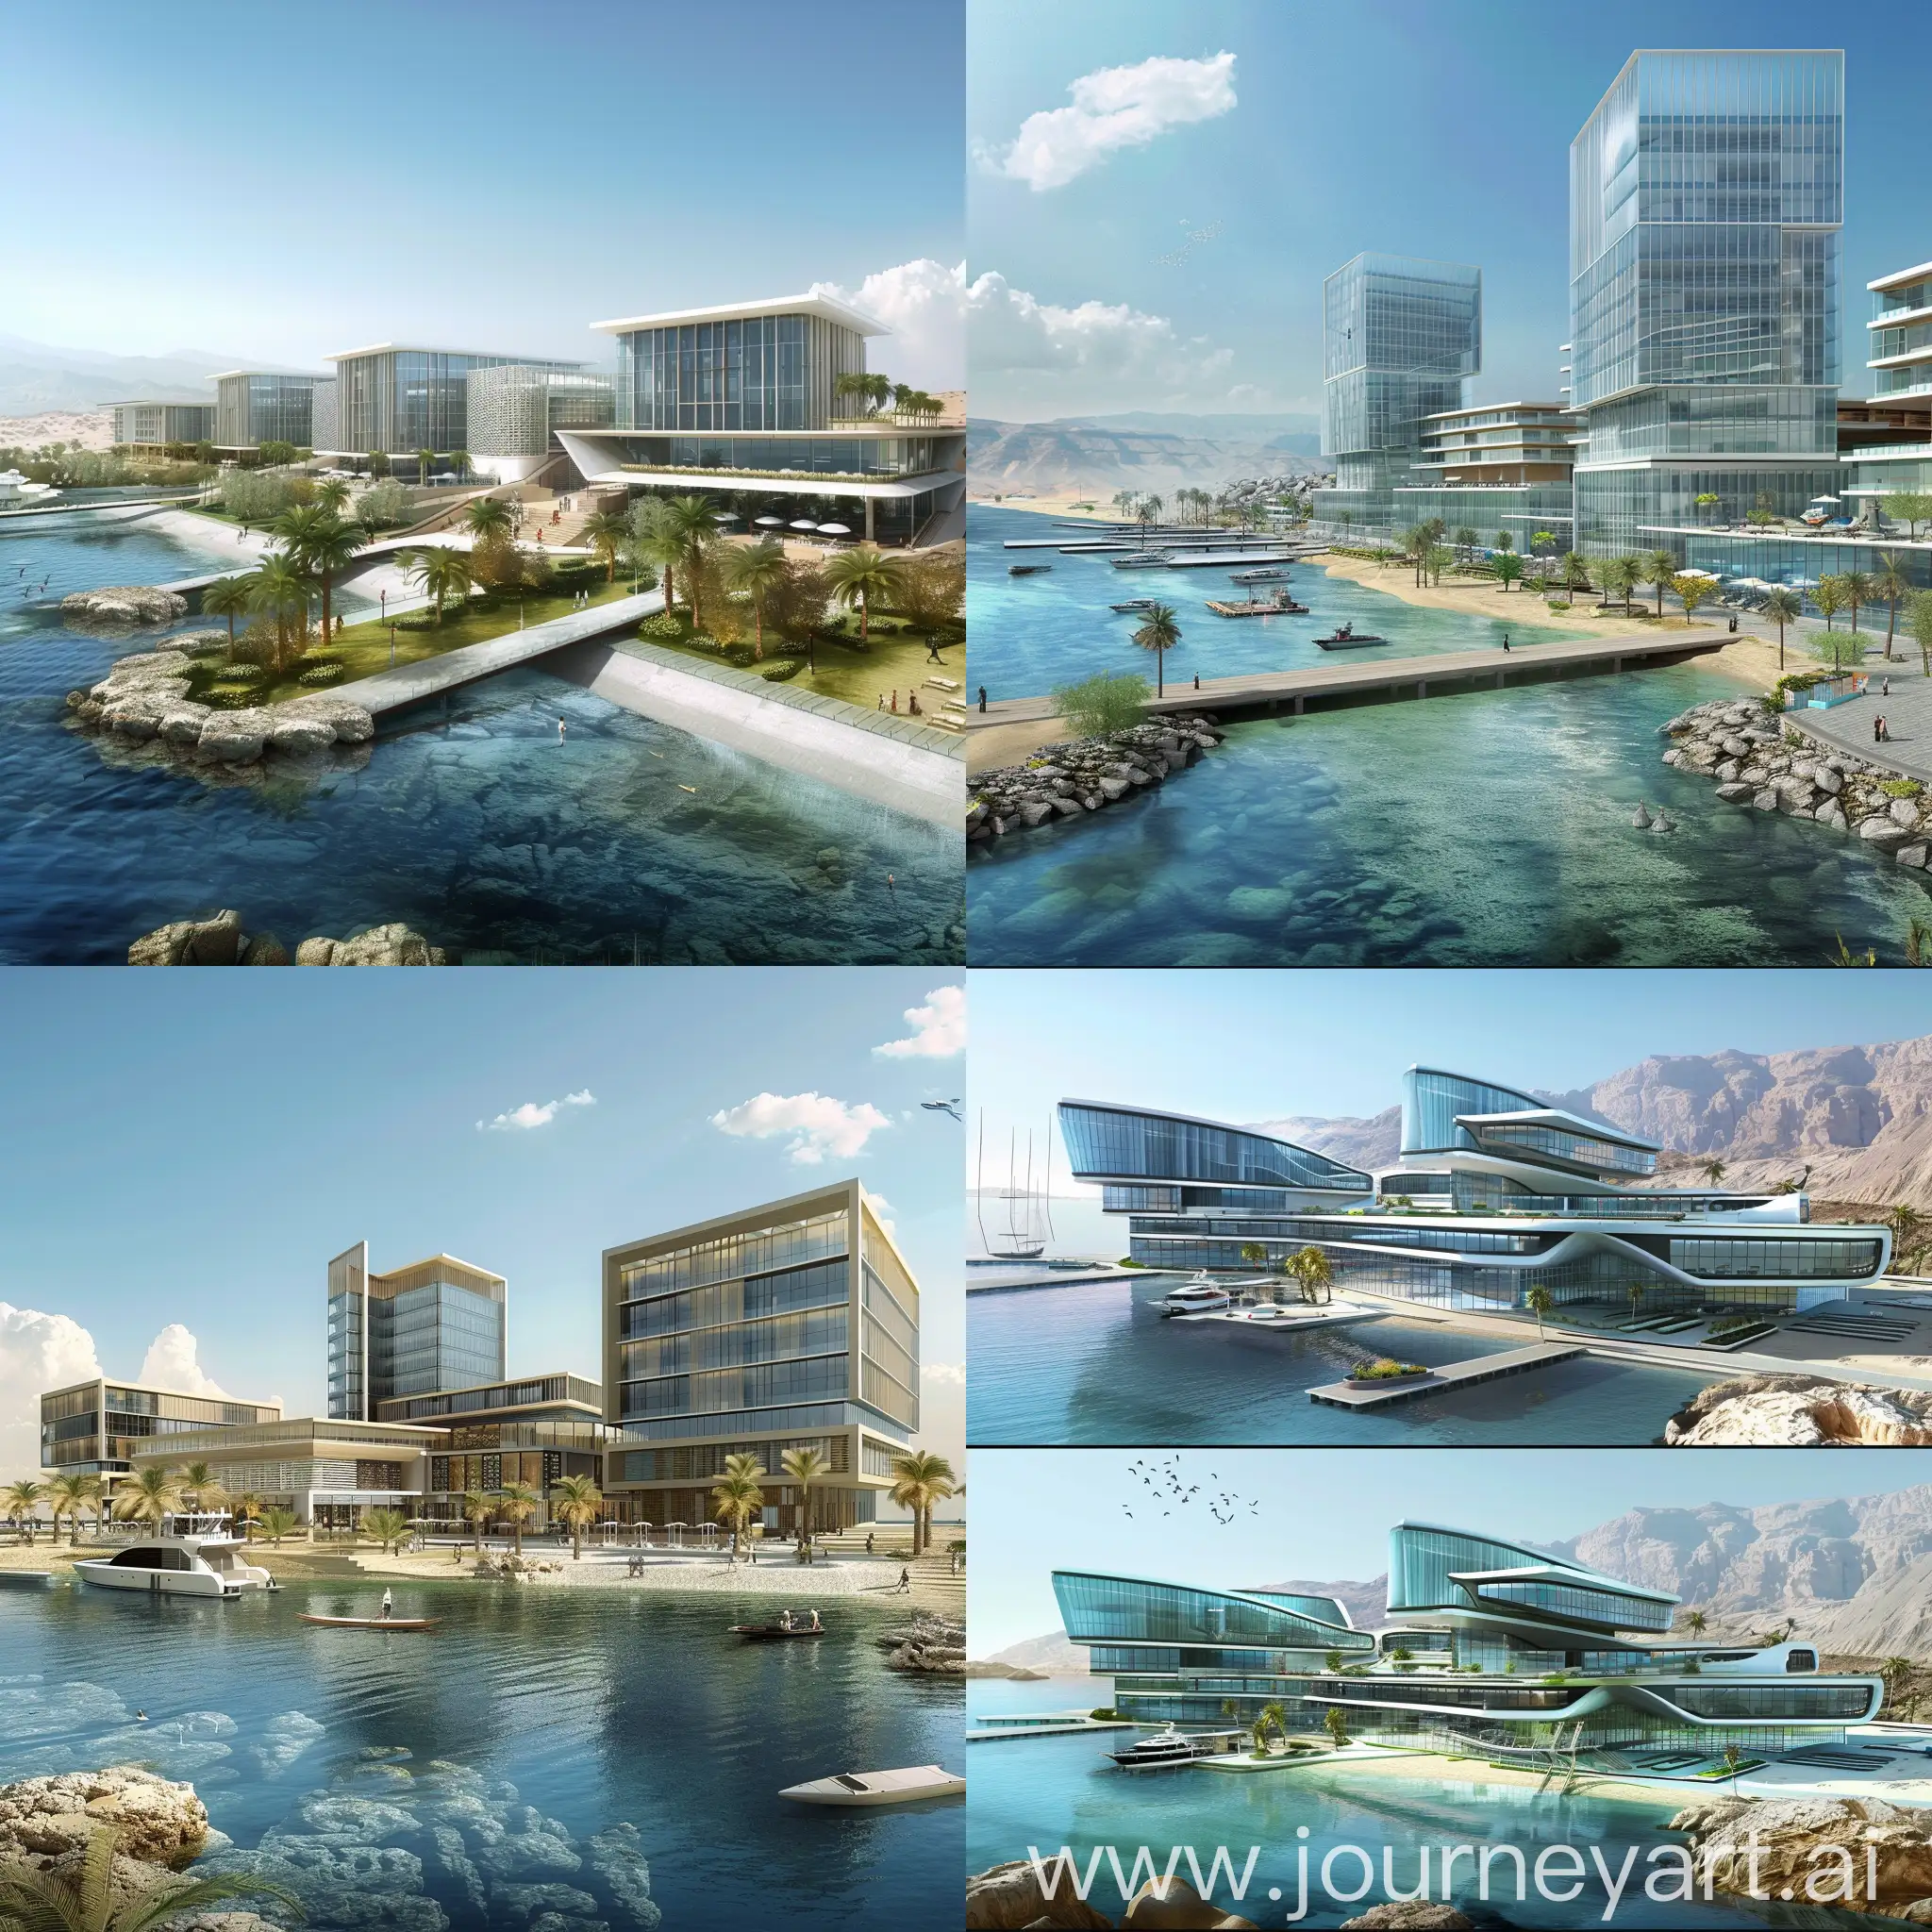 
The architectural concept for the Red Sea Coastal Complex in El Quseir is inspired by the region's maritime beauty and diverse commercial activities. The project comprises five buildings: an administrative building, offices and corporations building, medical clinics building, hotel, and entertainment facility. Located near the El Quseir port in Egypt, the complex aims to leverage the presence of import/export companies and mining offices due to the abundant mining resources in the area.

The proposed architectural theme integrates modernity with maritime elements, featuring a sleek administrative structure with glass facades for a clear sea view. The offices building emphasizes open design for collaboration, while the medical clinics building focuses on a calming atmosphere. The hotel incorporates nature-inspired designs, and the entertainment facility is contemporary and multi-functional.

To complement the concept, the addition of a small marina for tourist boats and storage facilities for import/export goods enhances the practicality of the complex. The design promotes sustainability, cultural integration, and efficient utilization of the region's resources. The overall vision is to create a unique and vibrant environment that caters to various needs while harmonizing with the coastal surroundings in El Quseir.